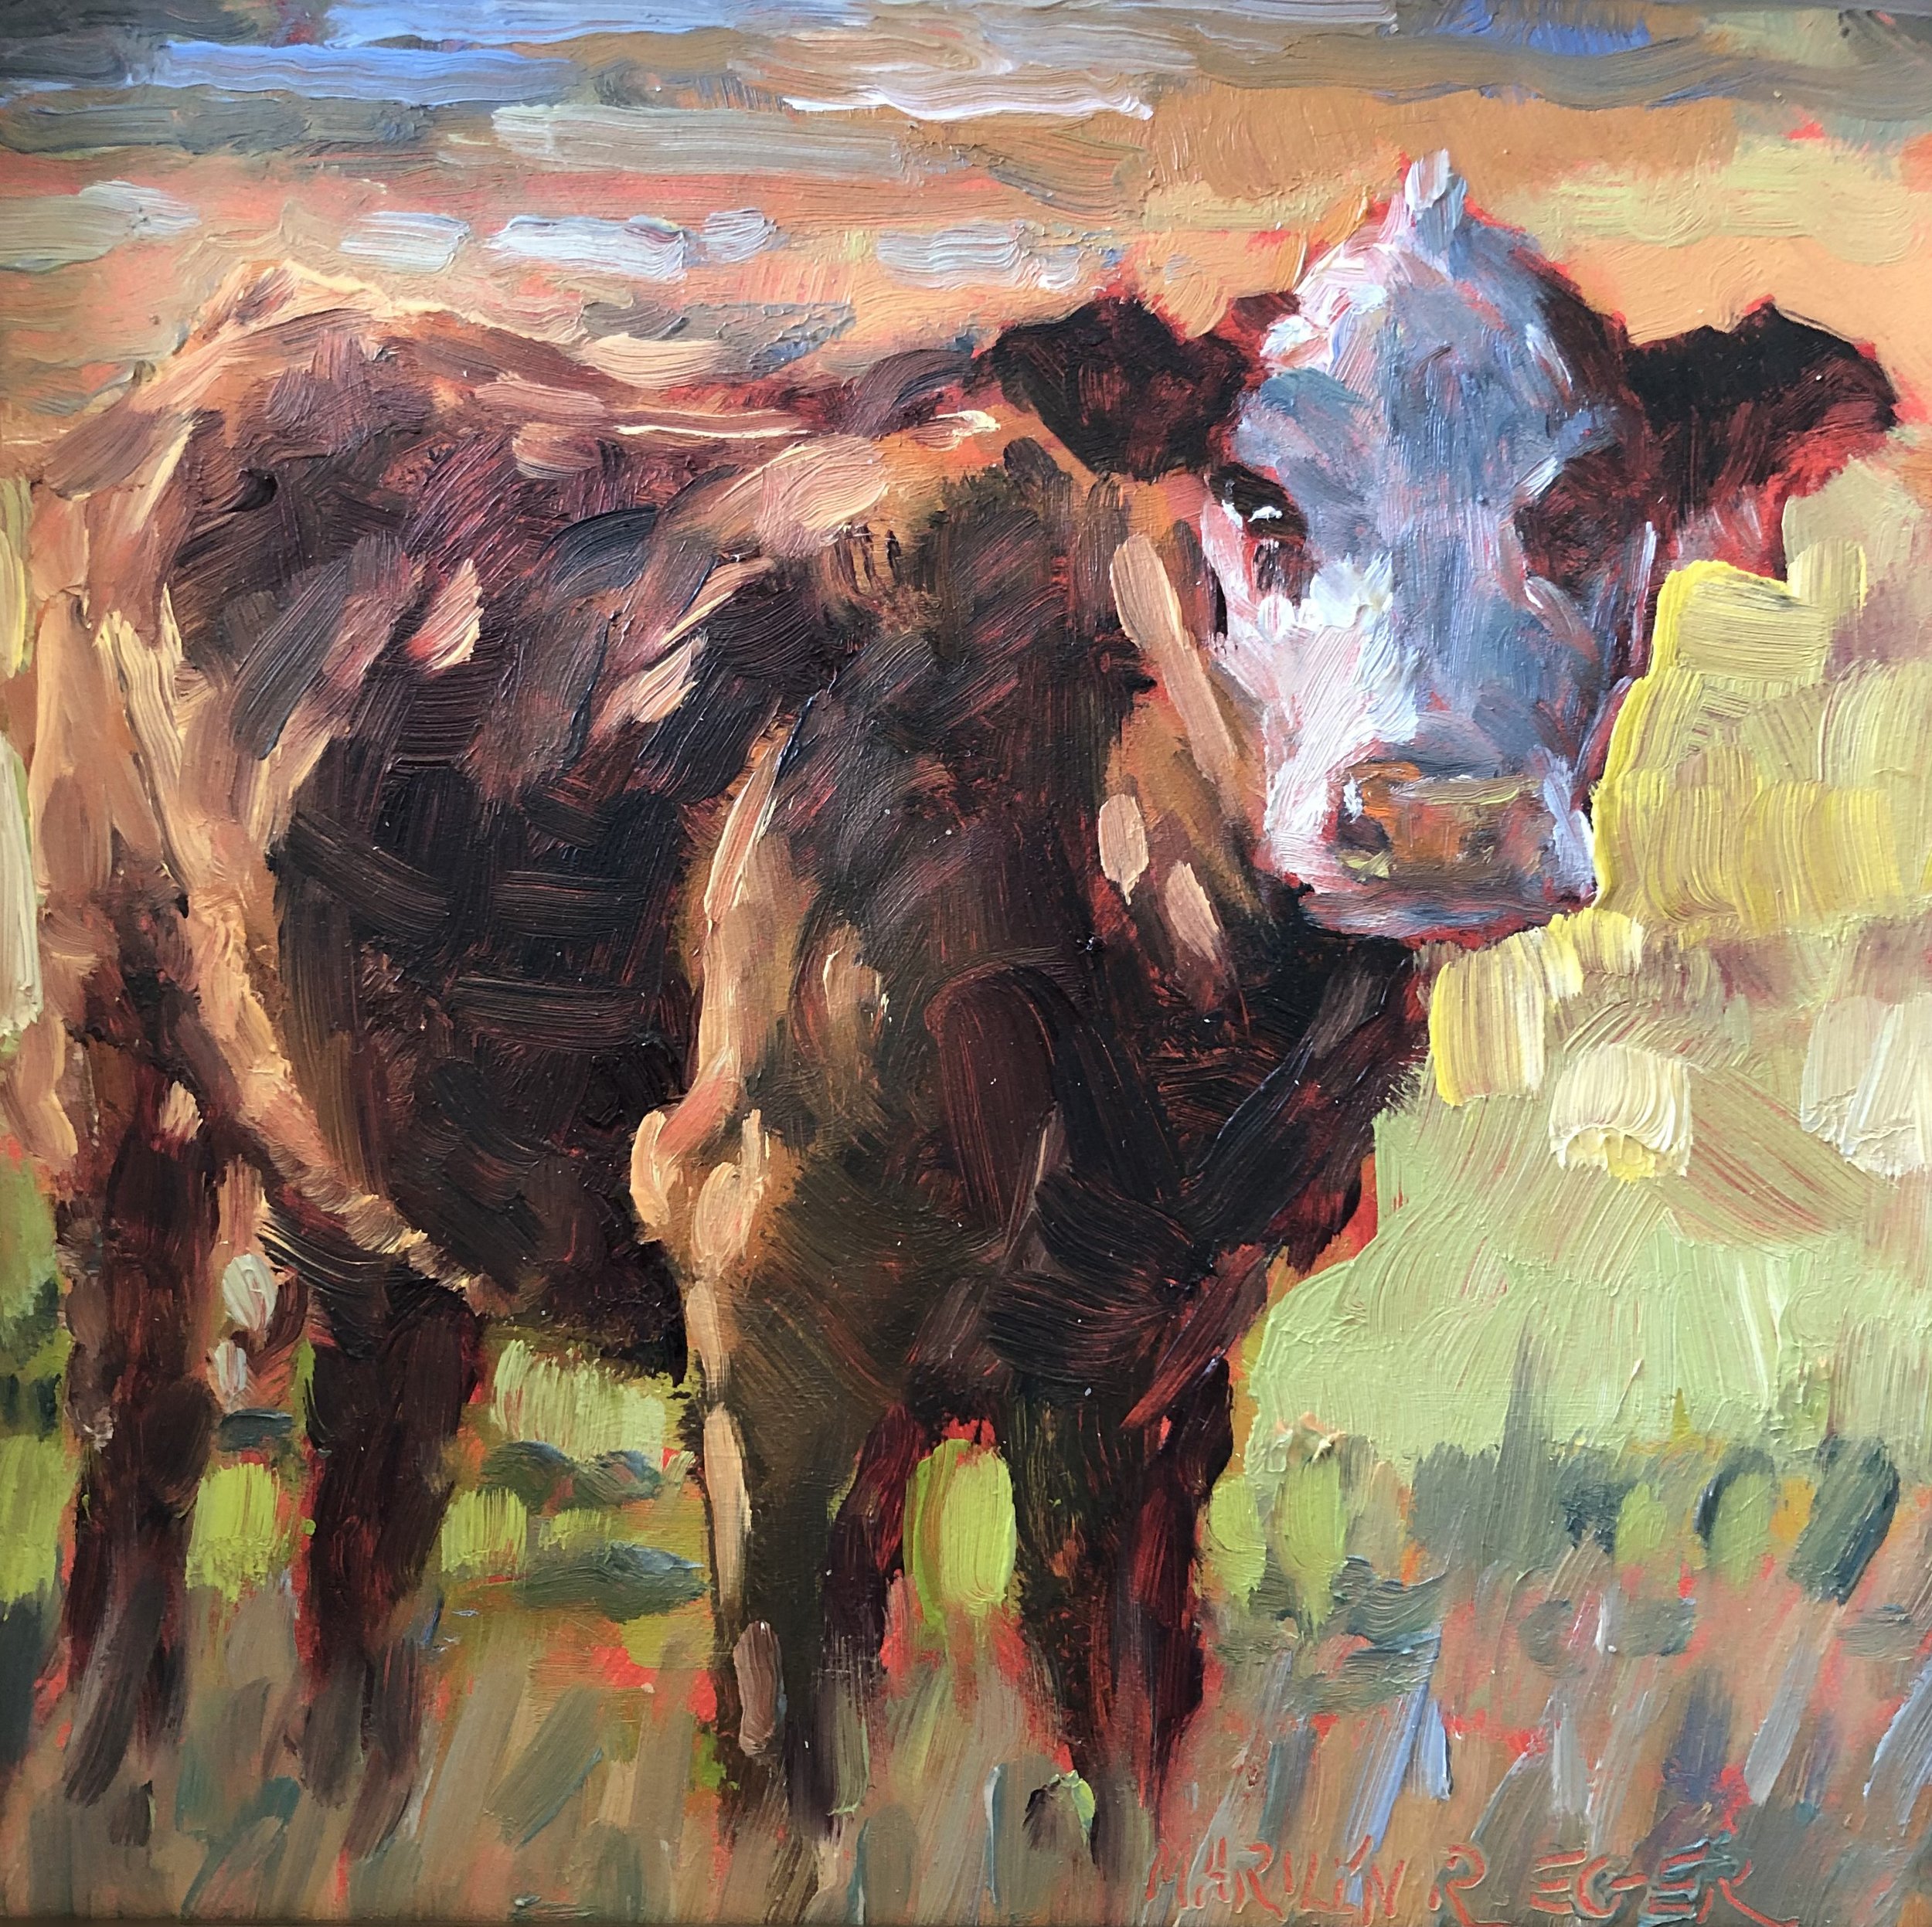 Curious Cow by Marilyn Eger